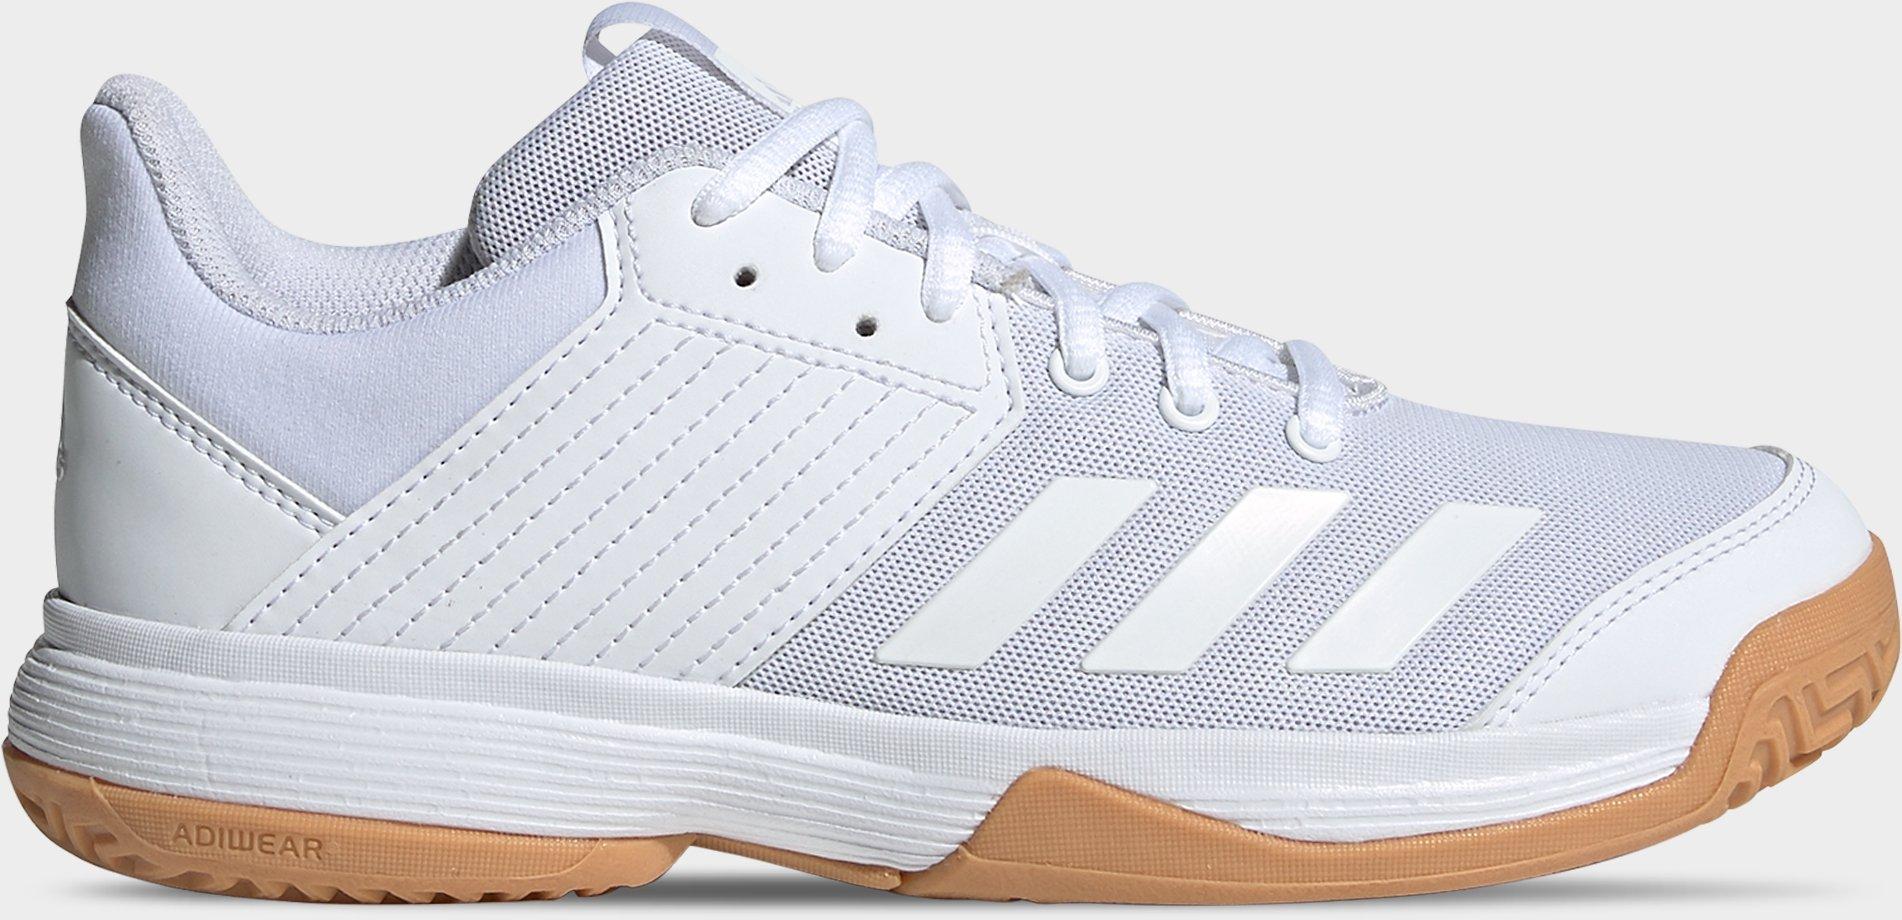 white adidas volleyball shoes